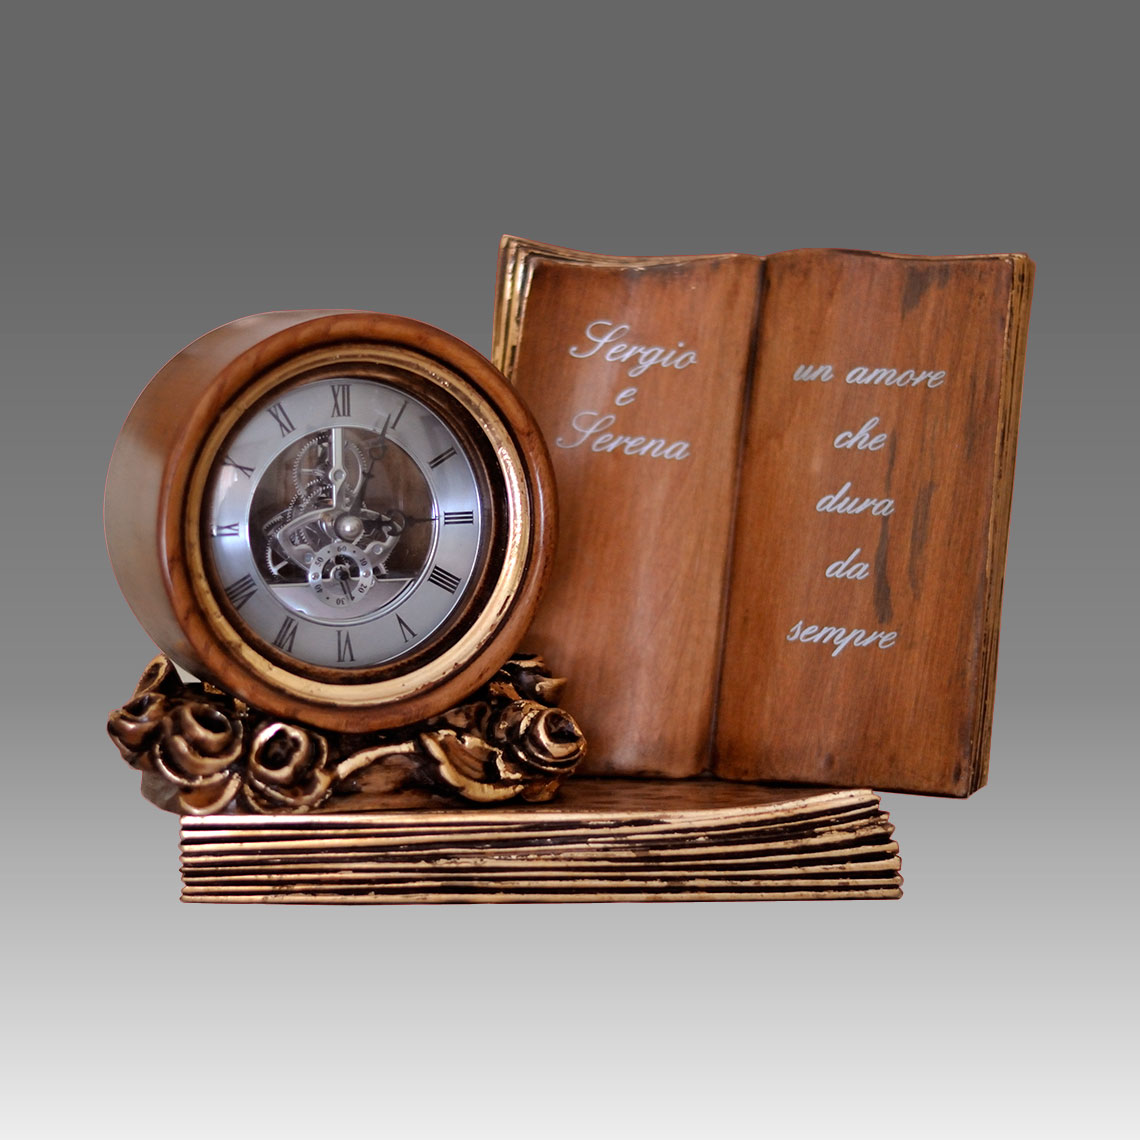 Mante Clock, Table Clock, Cimn Clock, Art.321/1 walnut - Westminster melody on rod gong, moon fase dial